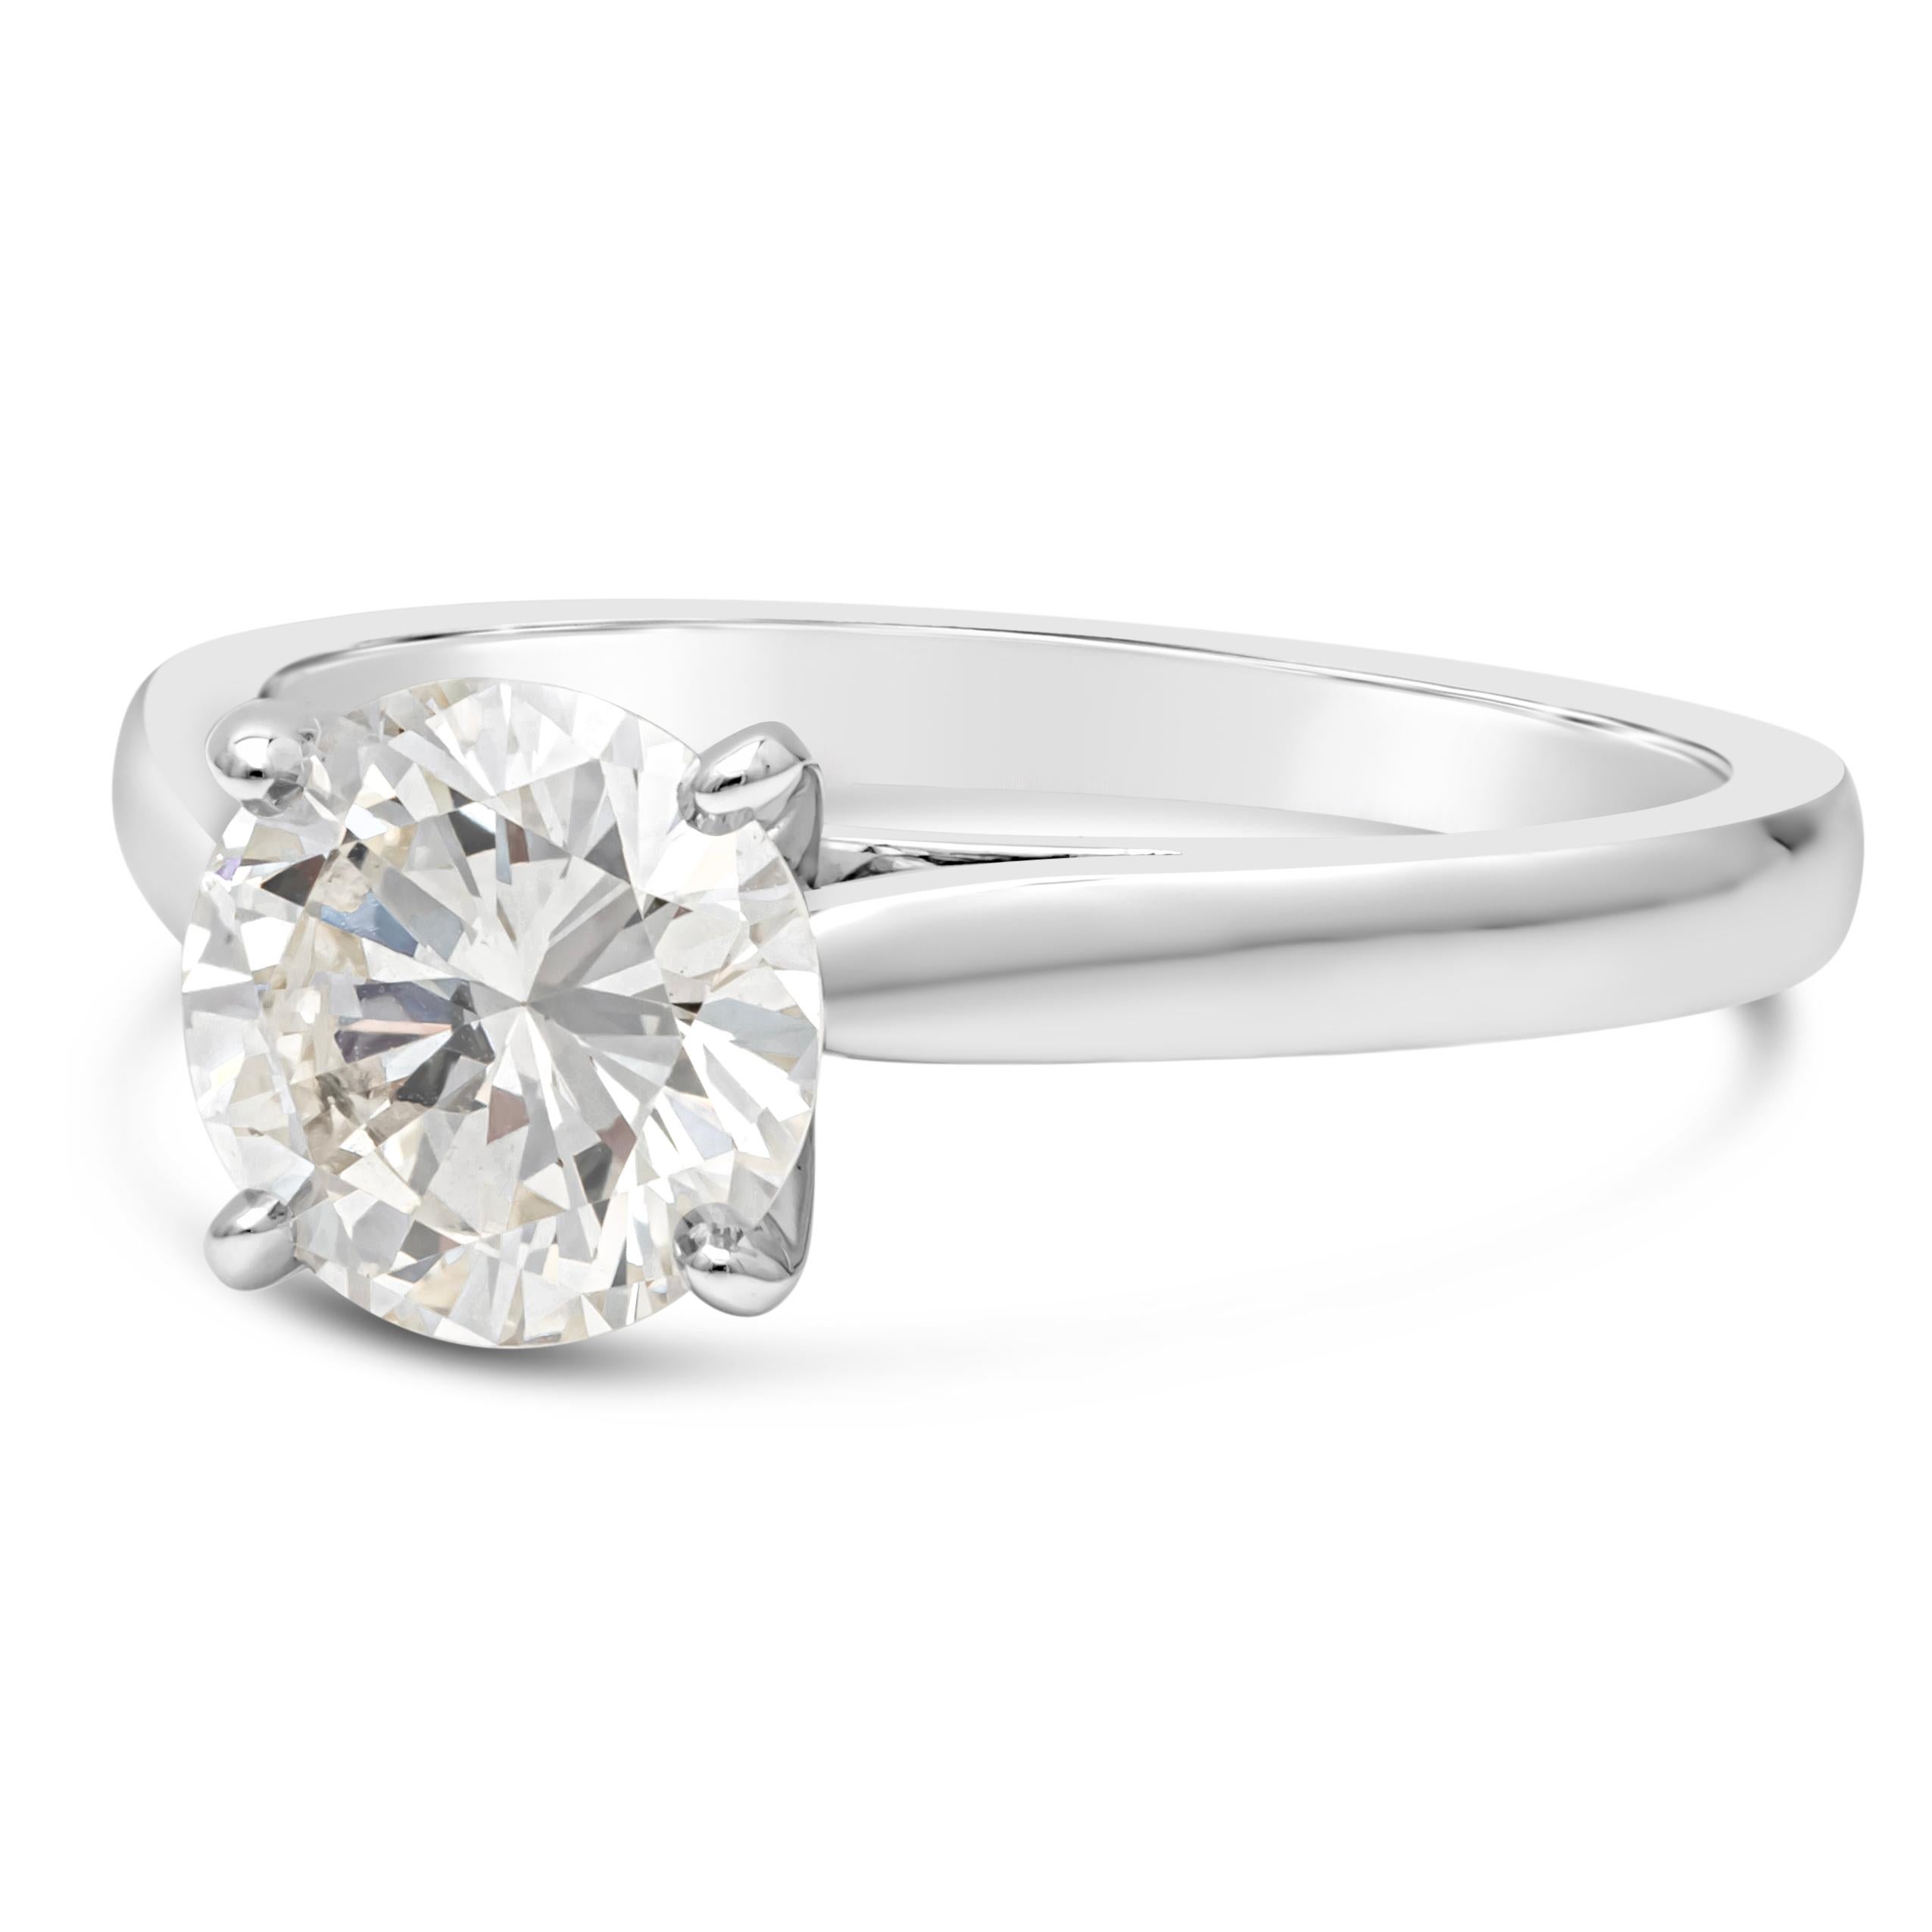 A classic solitaire engagement ring, showcasing a 1.34 carats round brilliant cut diamond certified by EGL as H color and VS1 clarity. Set on a four prong basket setting. Finely made with 14K white gold. Size 5.75 US, resizable upon request.

Roman